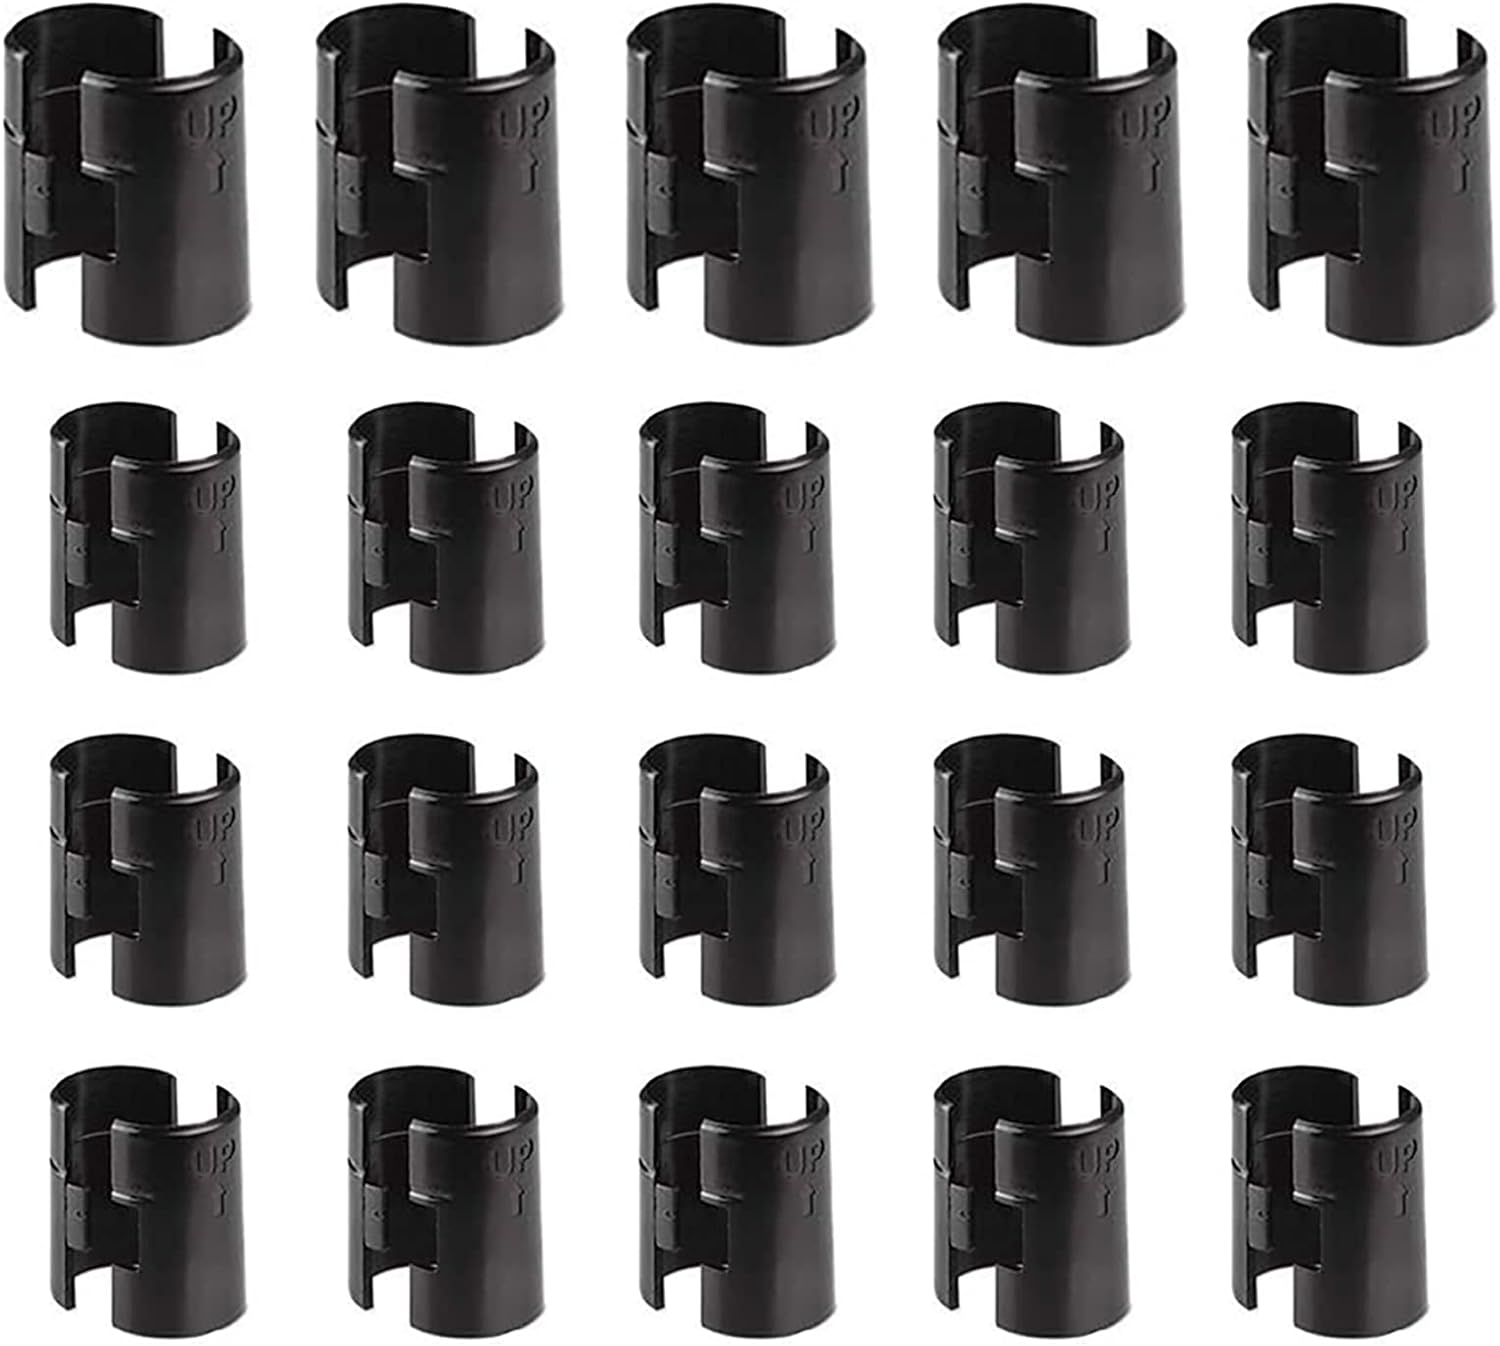 QPINGH Wire Shelf Clips for 1" Post, 20 Pairs 40 Pieces Wire Shelving Shelf Lock Clips, Shelving Sleeves Replacements